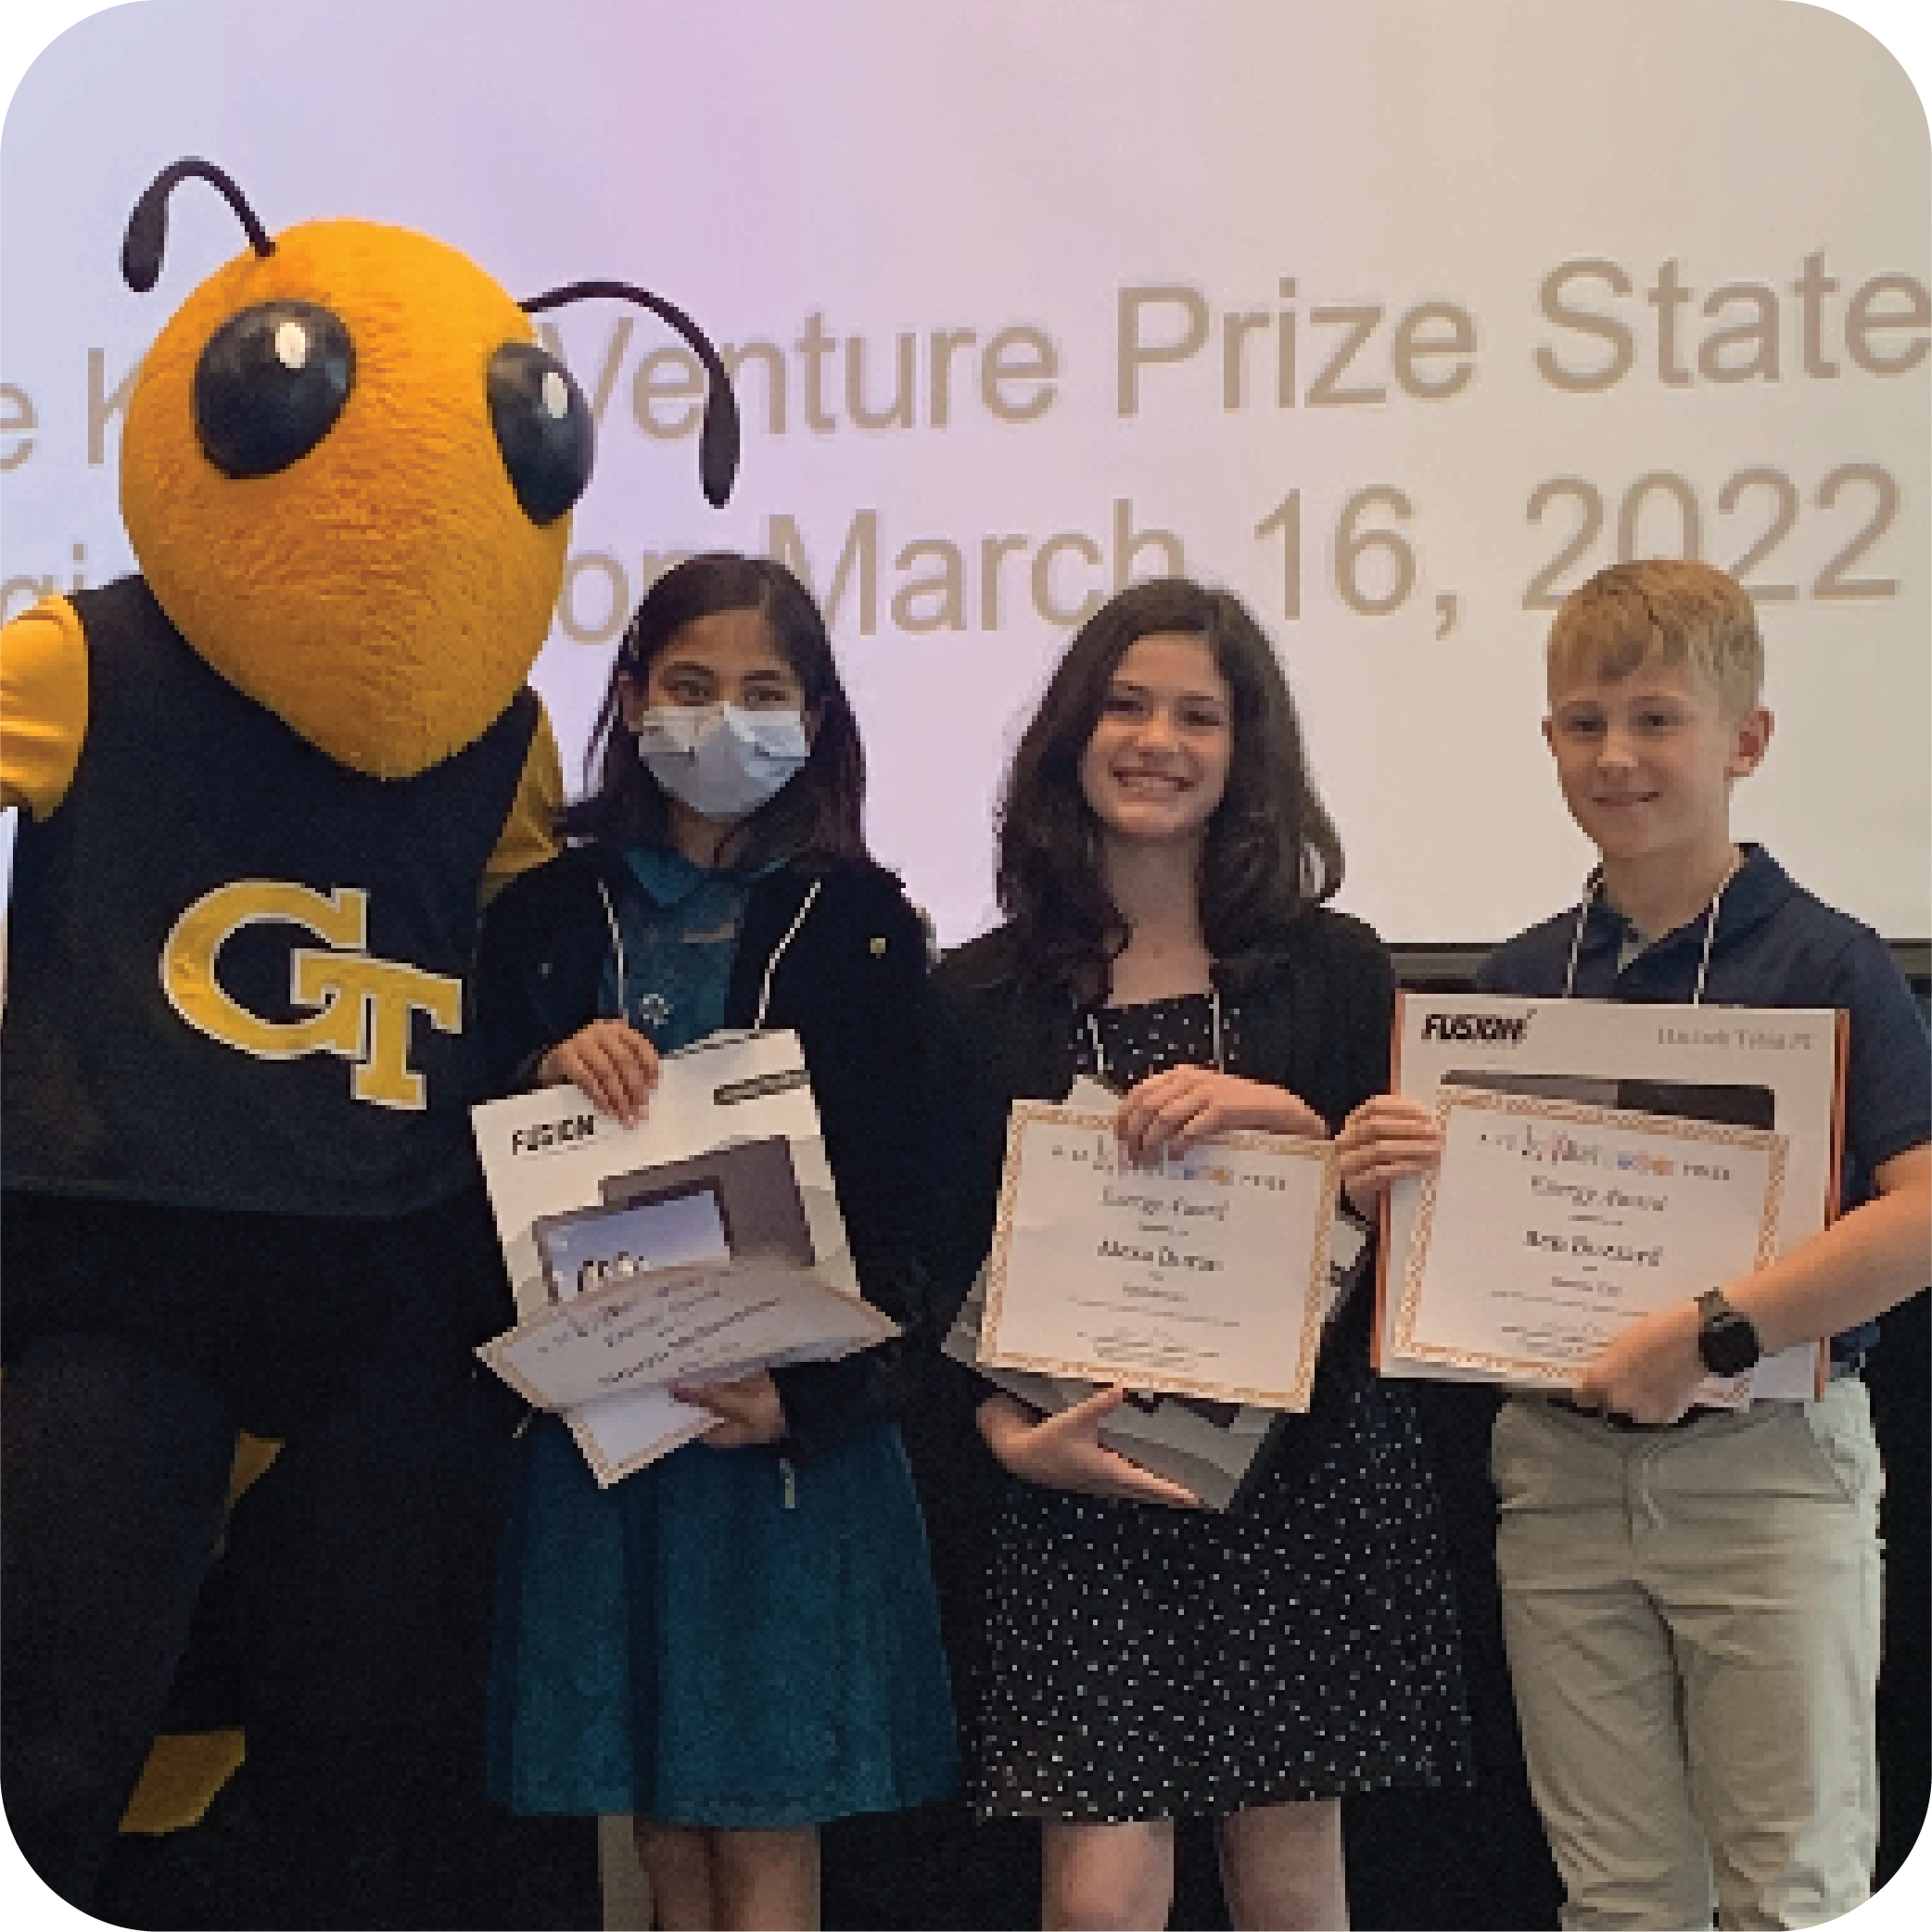 Three smiling students holding prizes and standing next to Buzz (Georgia Tech's yellowjacket mascot).